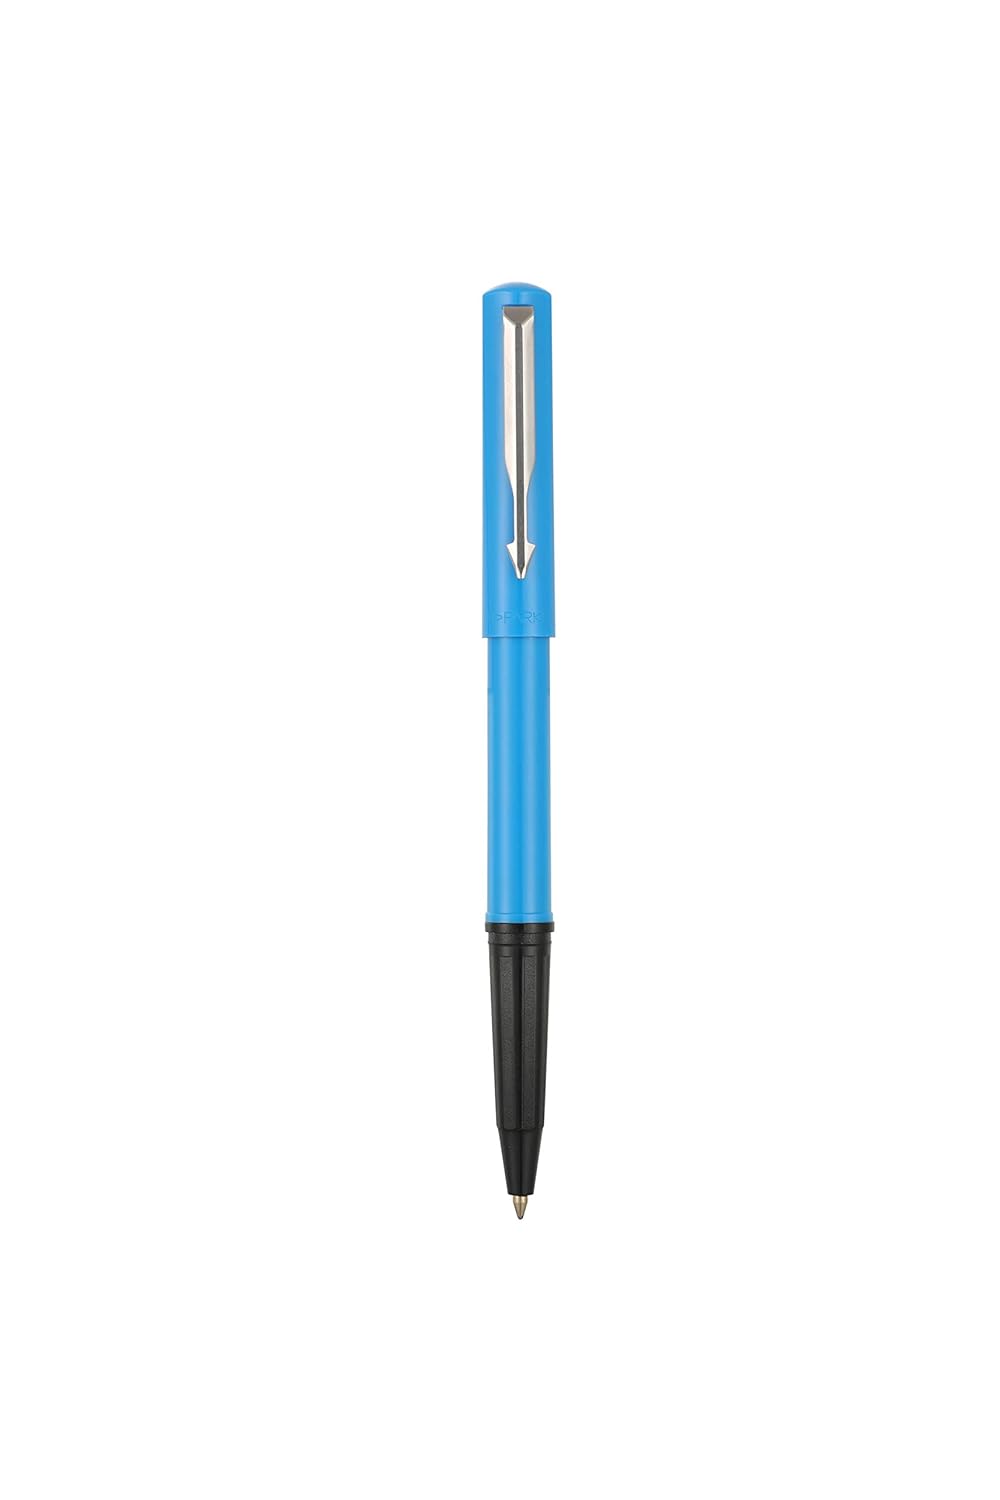 Parker Beta Neo With Stainless Steel Ball Pen - Bbag | India’s Best Online Stationery Store